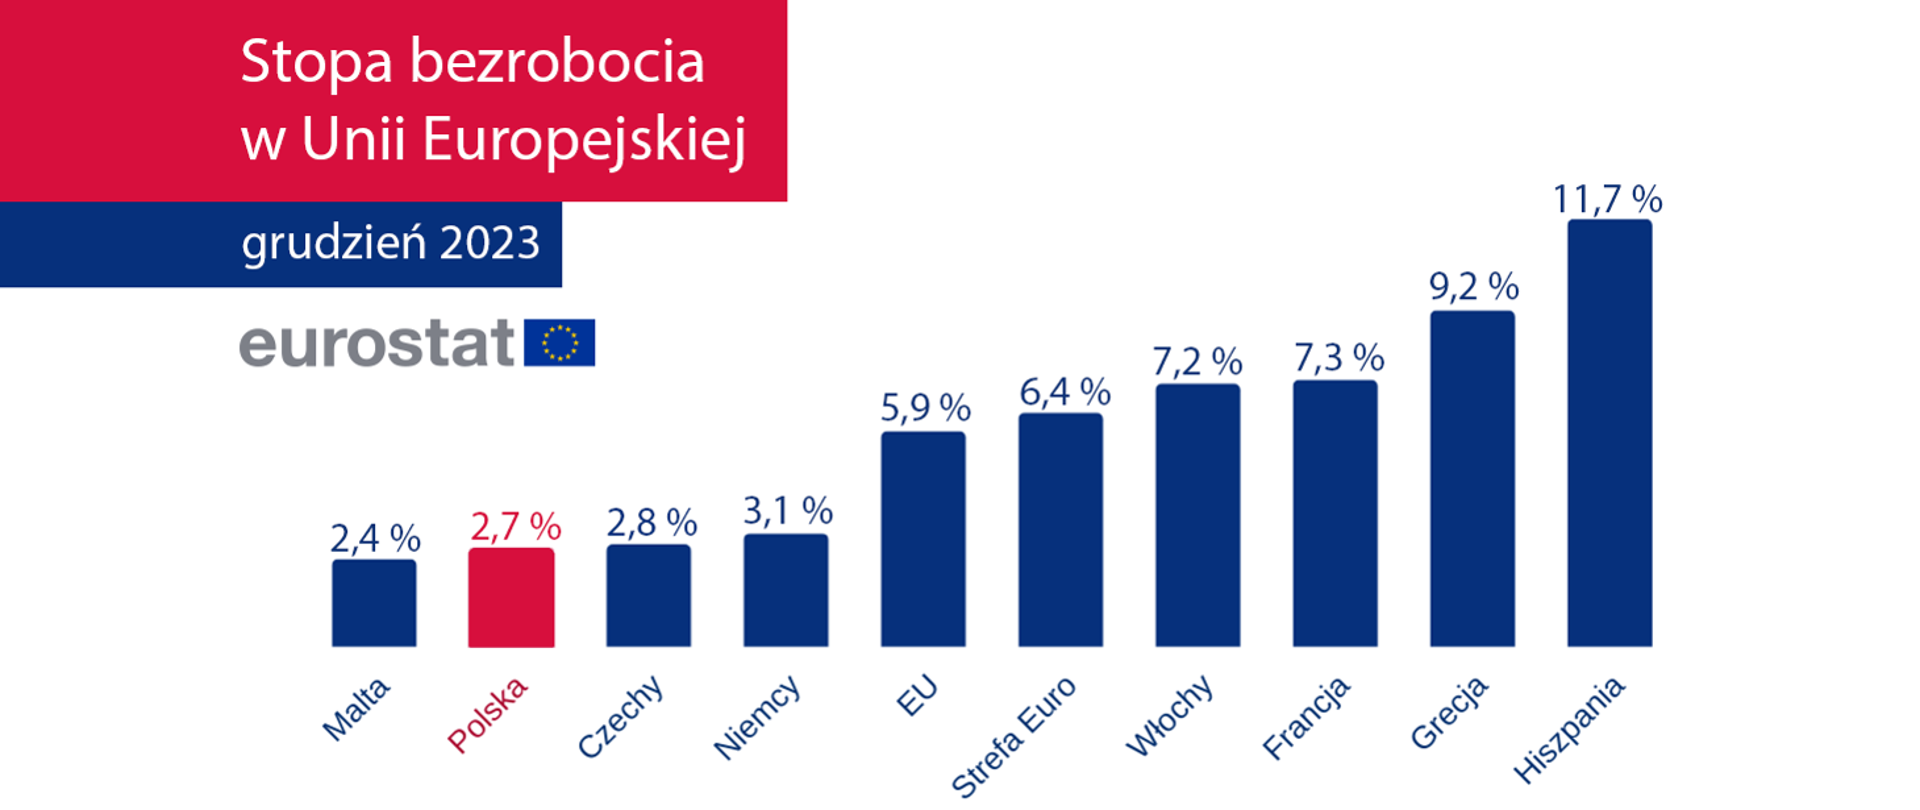 Poland ranks second in the EU with the lowest unemployment rate, according to Eurostat